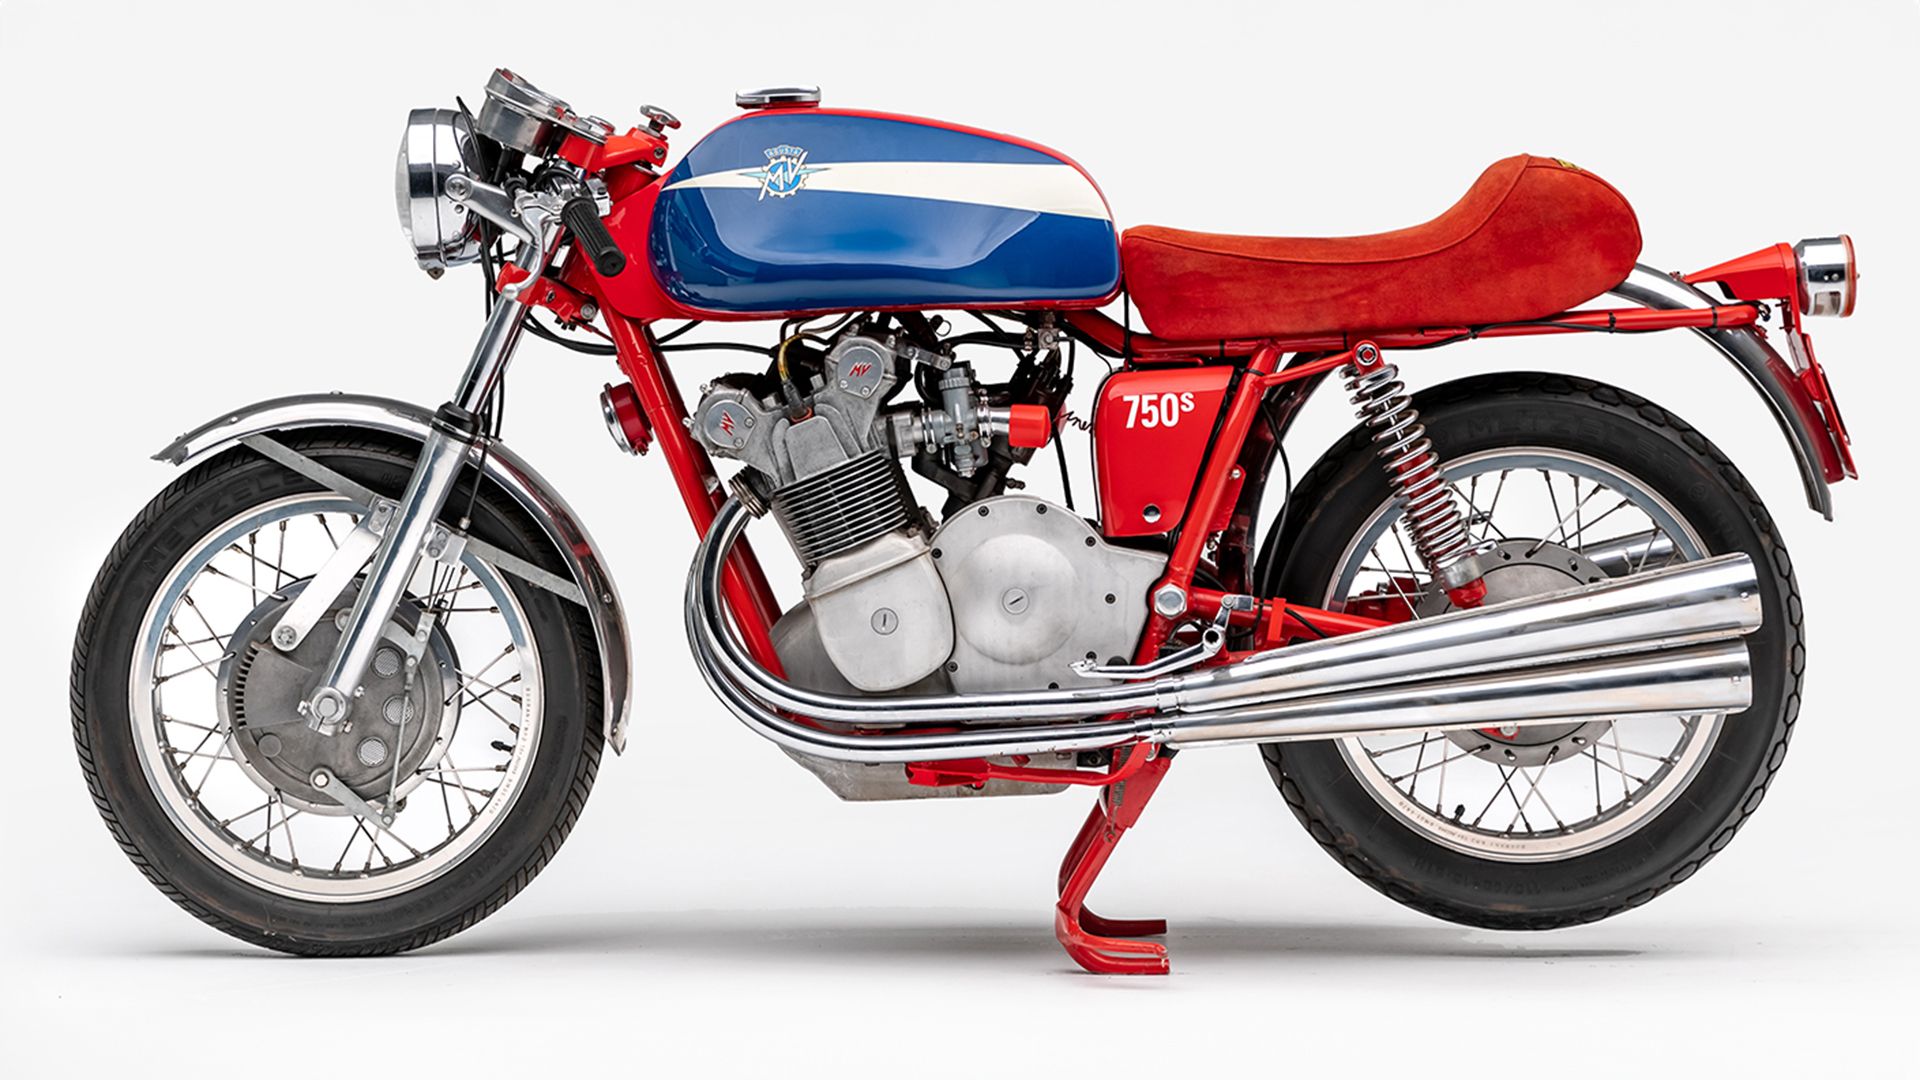 1973 MV Agusta 750 Sport in red, white, and blue